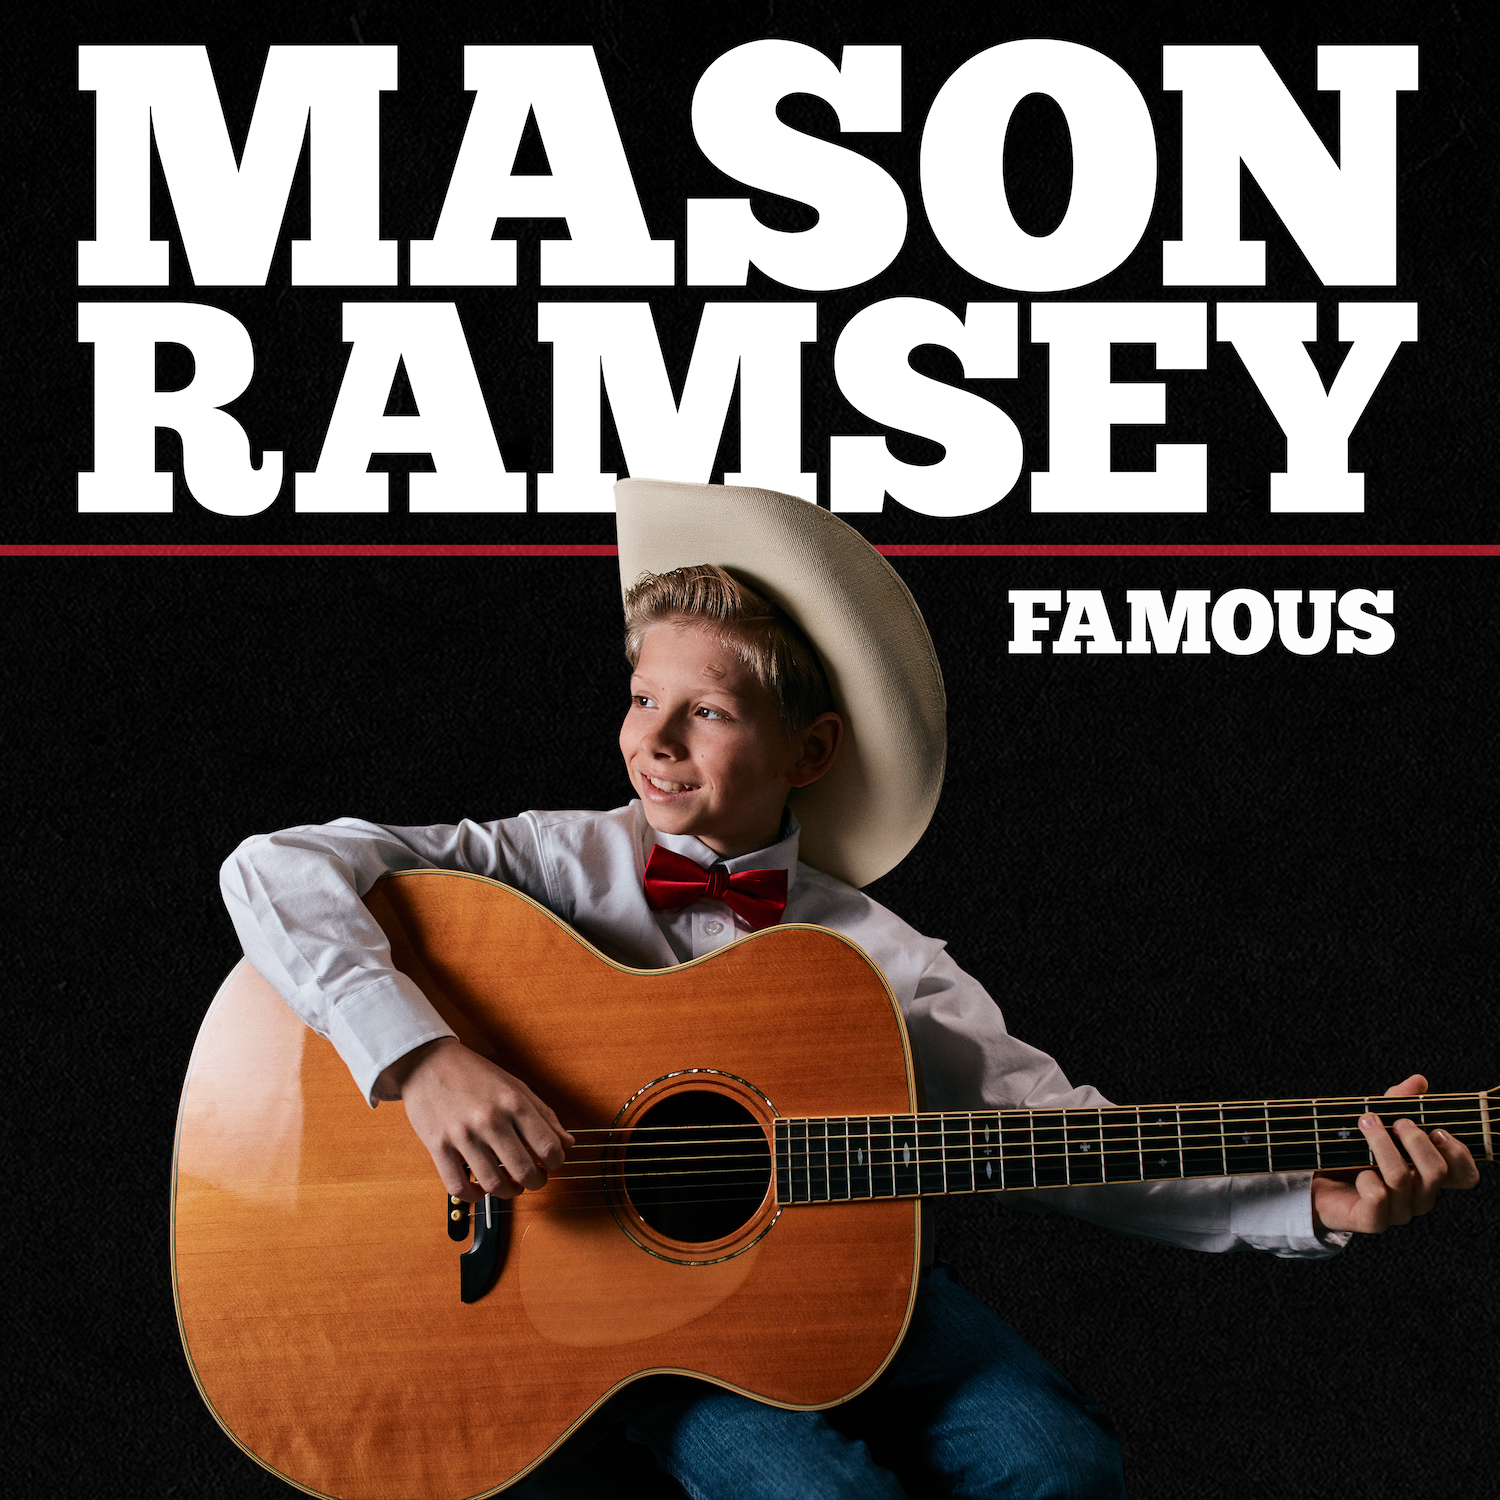 Mason Ramsey Shows Us What It’s Like to Be “Famous” in New Video